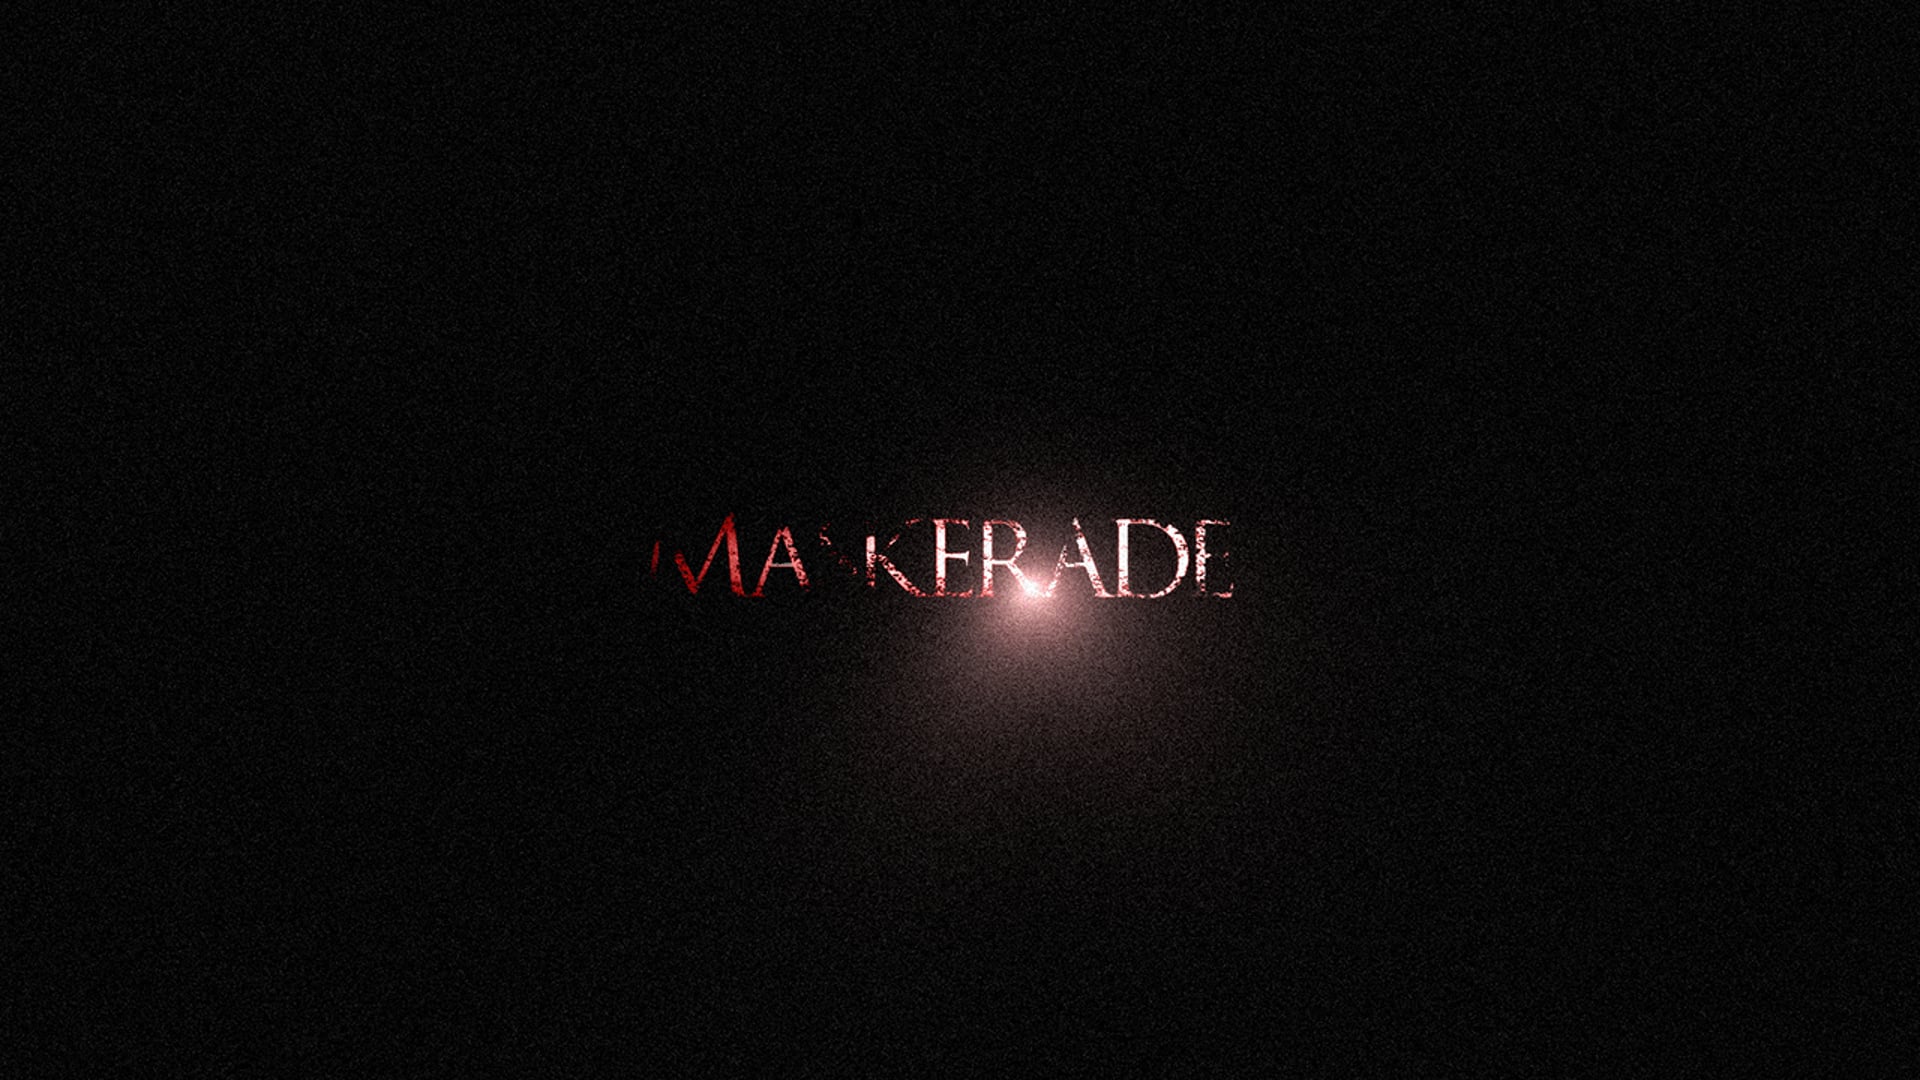 Maskerade - Main Title Sequence